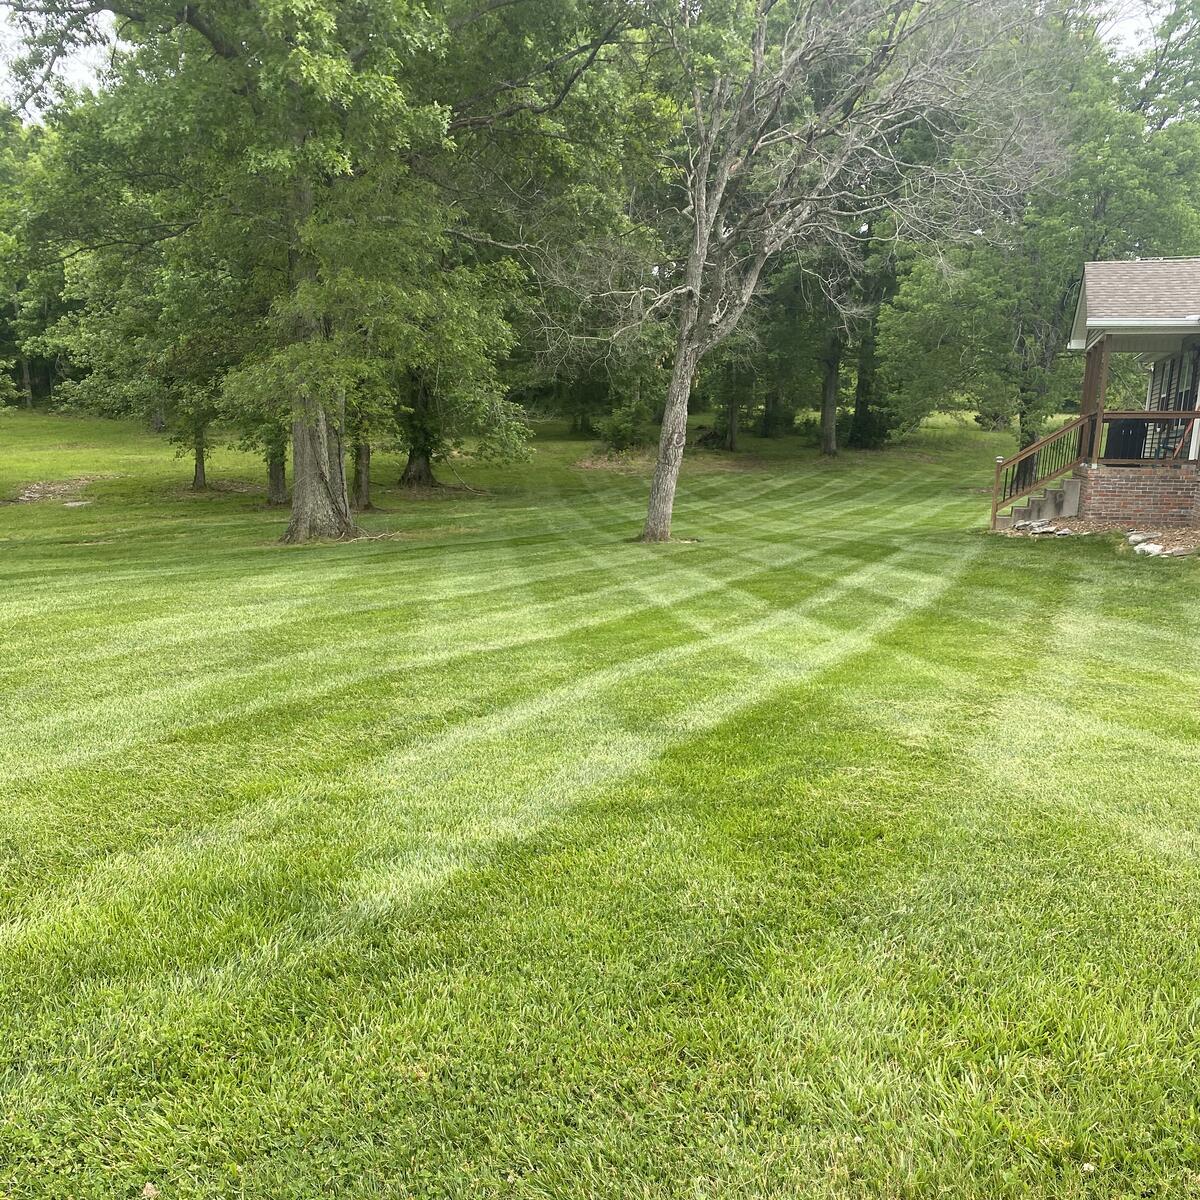 Pookum's Lawn Care 200 Carr Ln, Castalian Springs Tennessee 37031